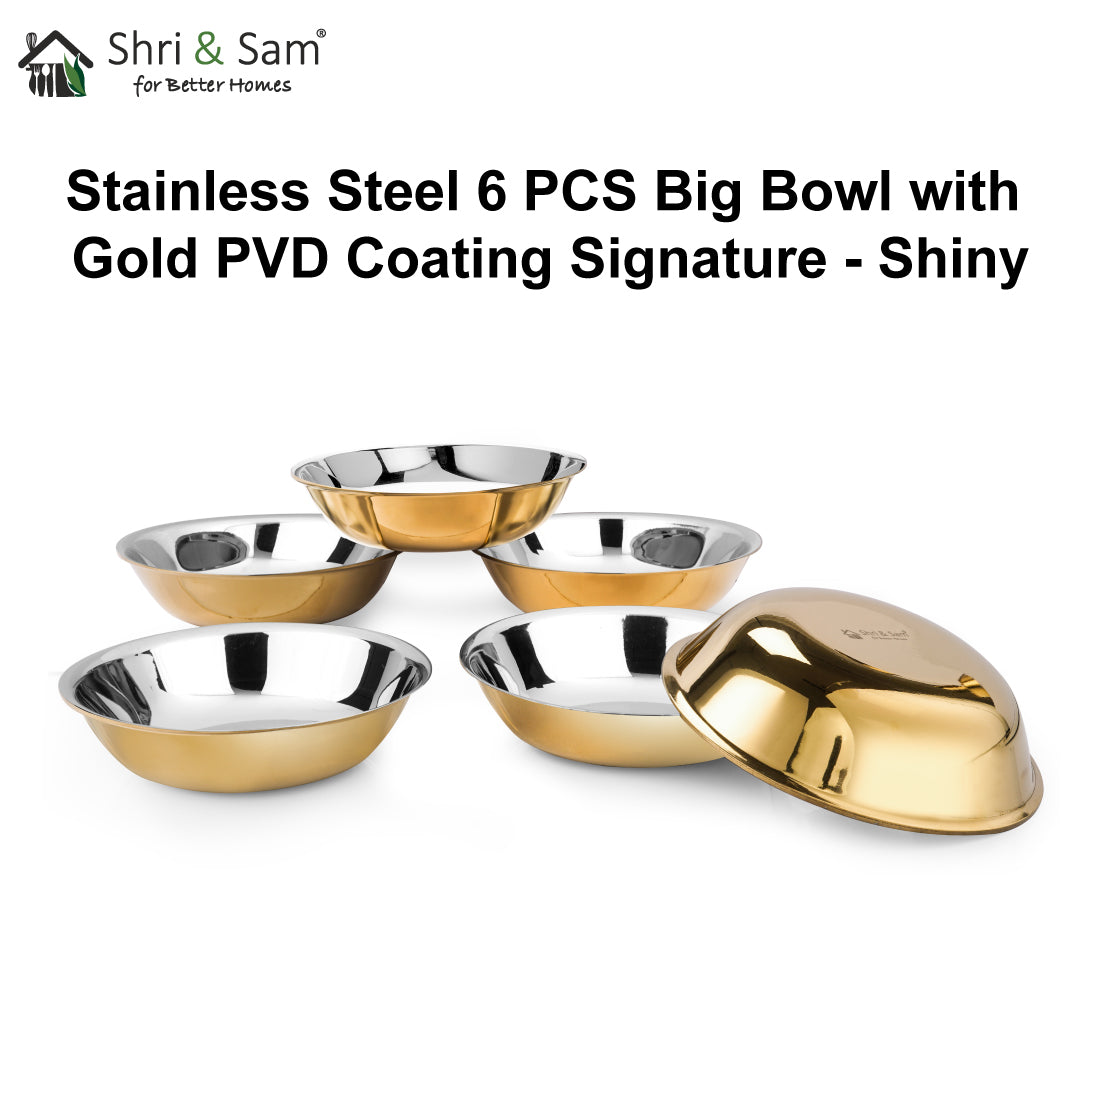 Stainless Steel 6 PCS Big Bowl with Gold PVD Coating Signature - Shiny